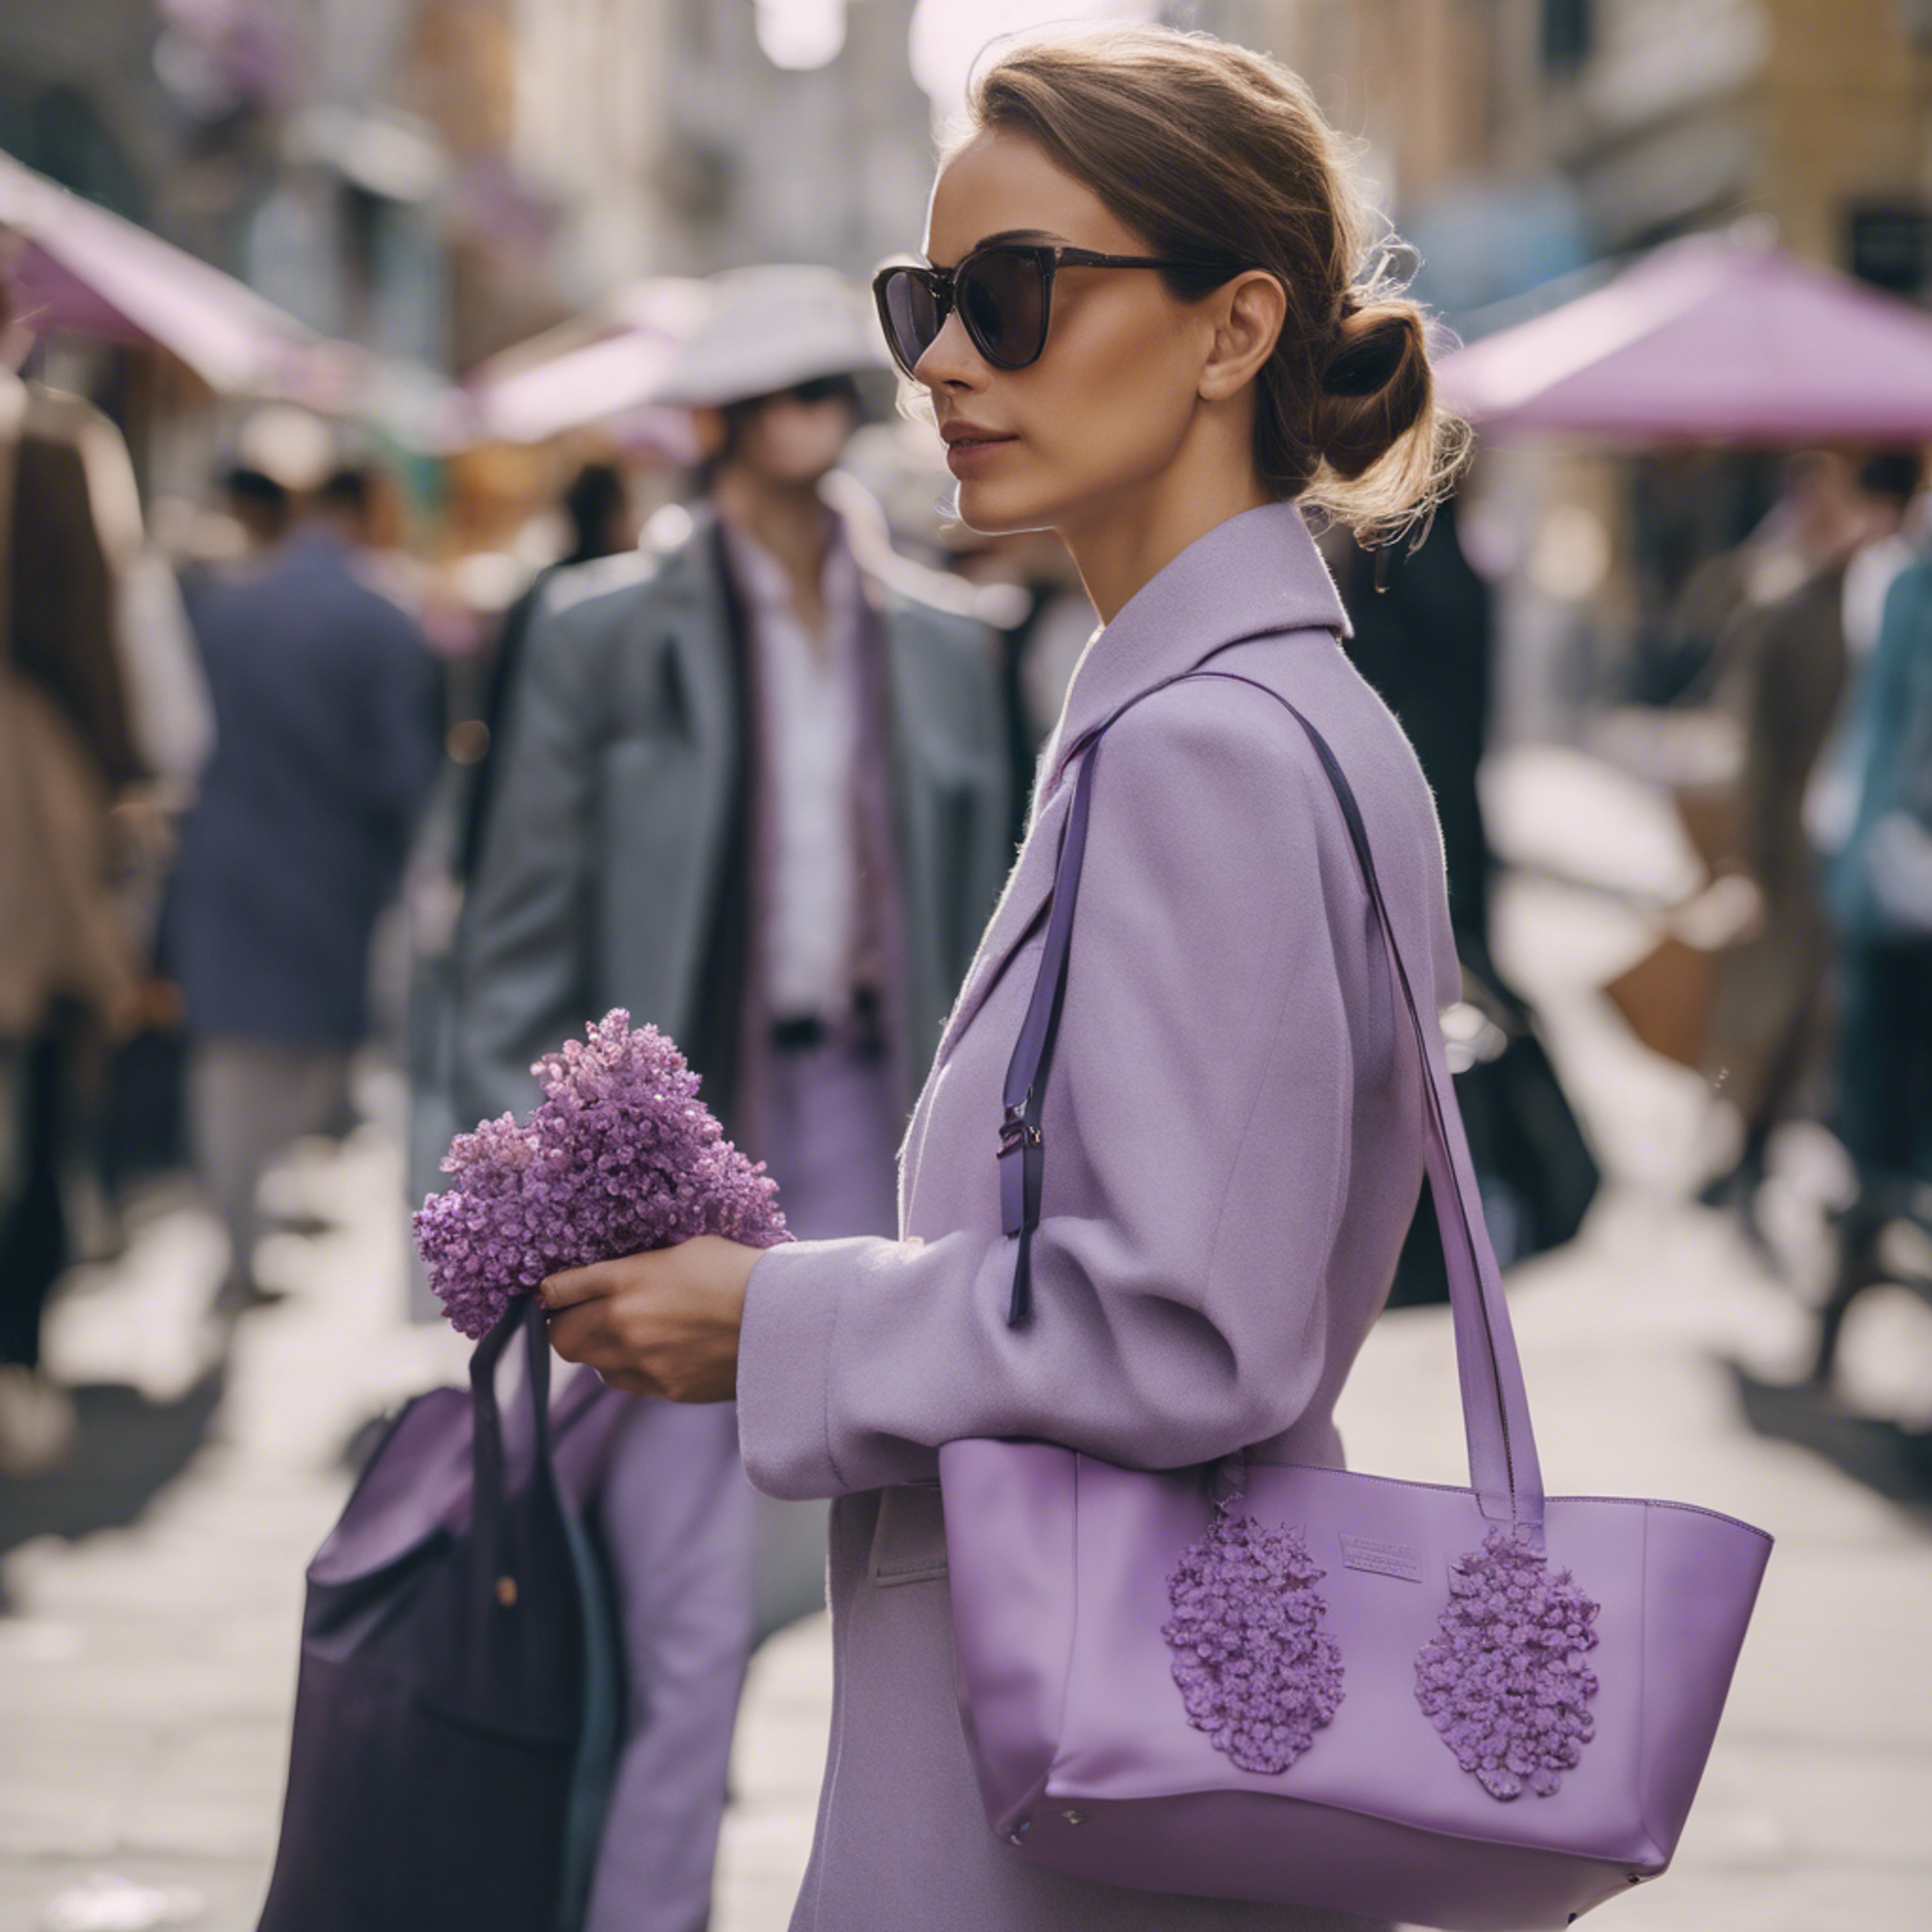 An elegant lady carrying a preppy lilac tote bag while walking along a crowded city street. Tapeta[fda66da185c34bc685d3]